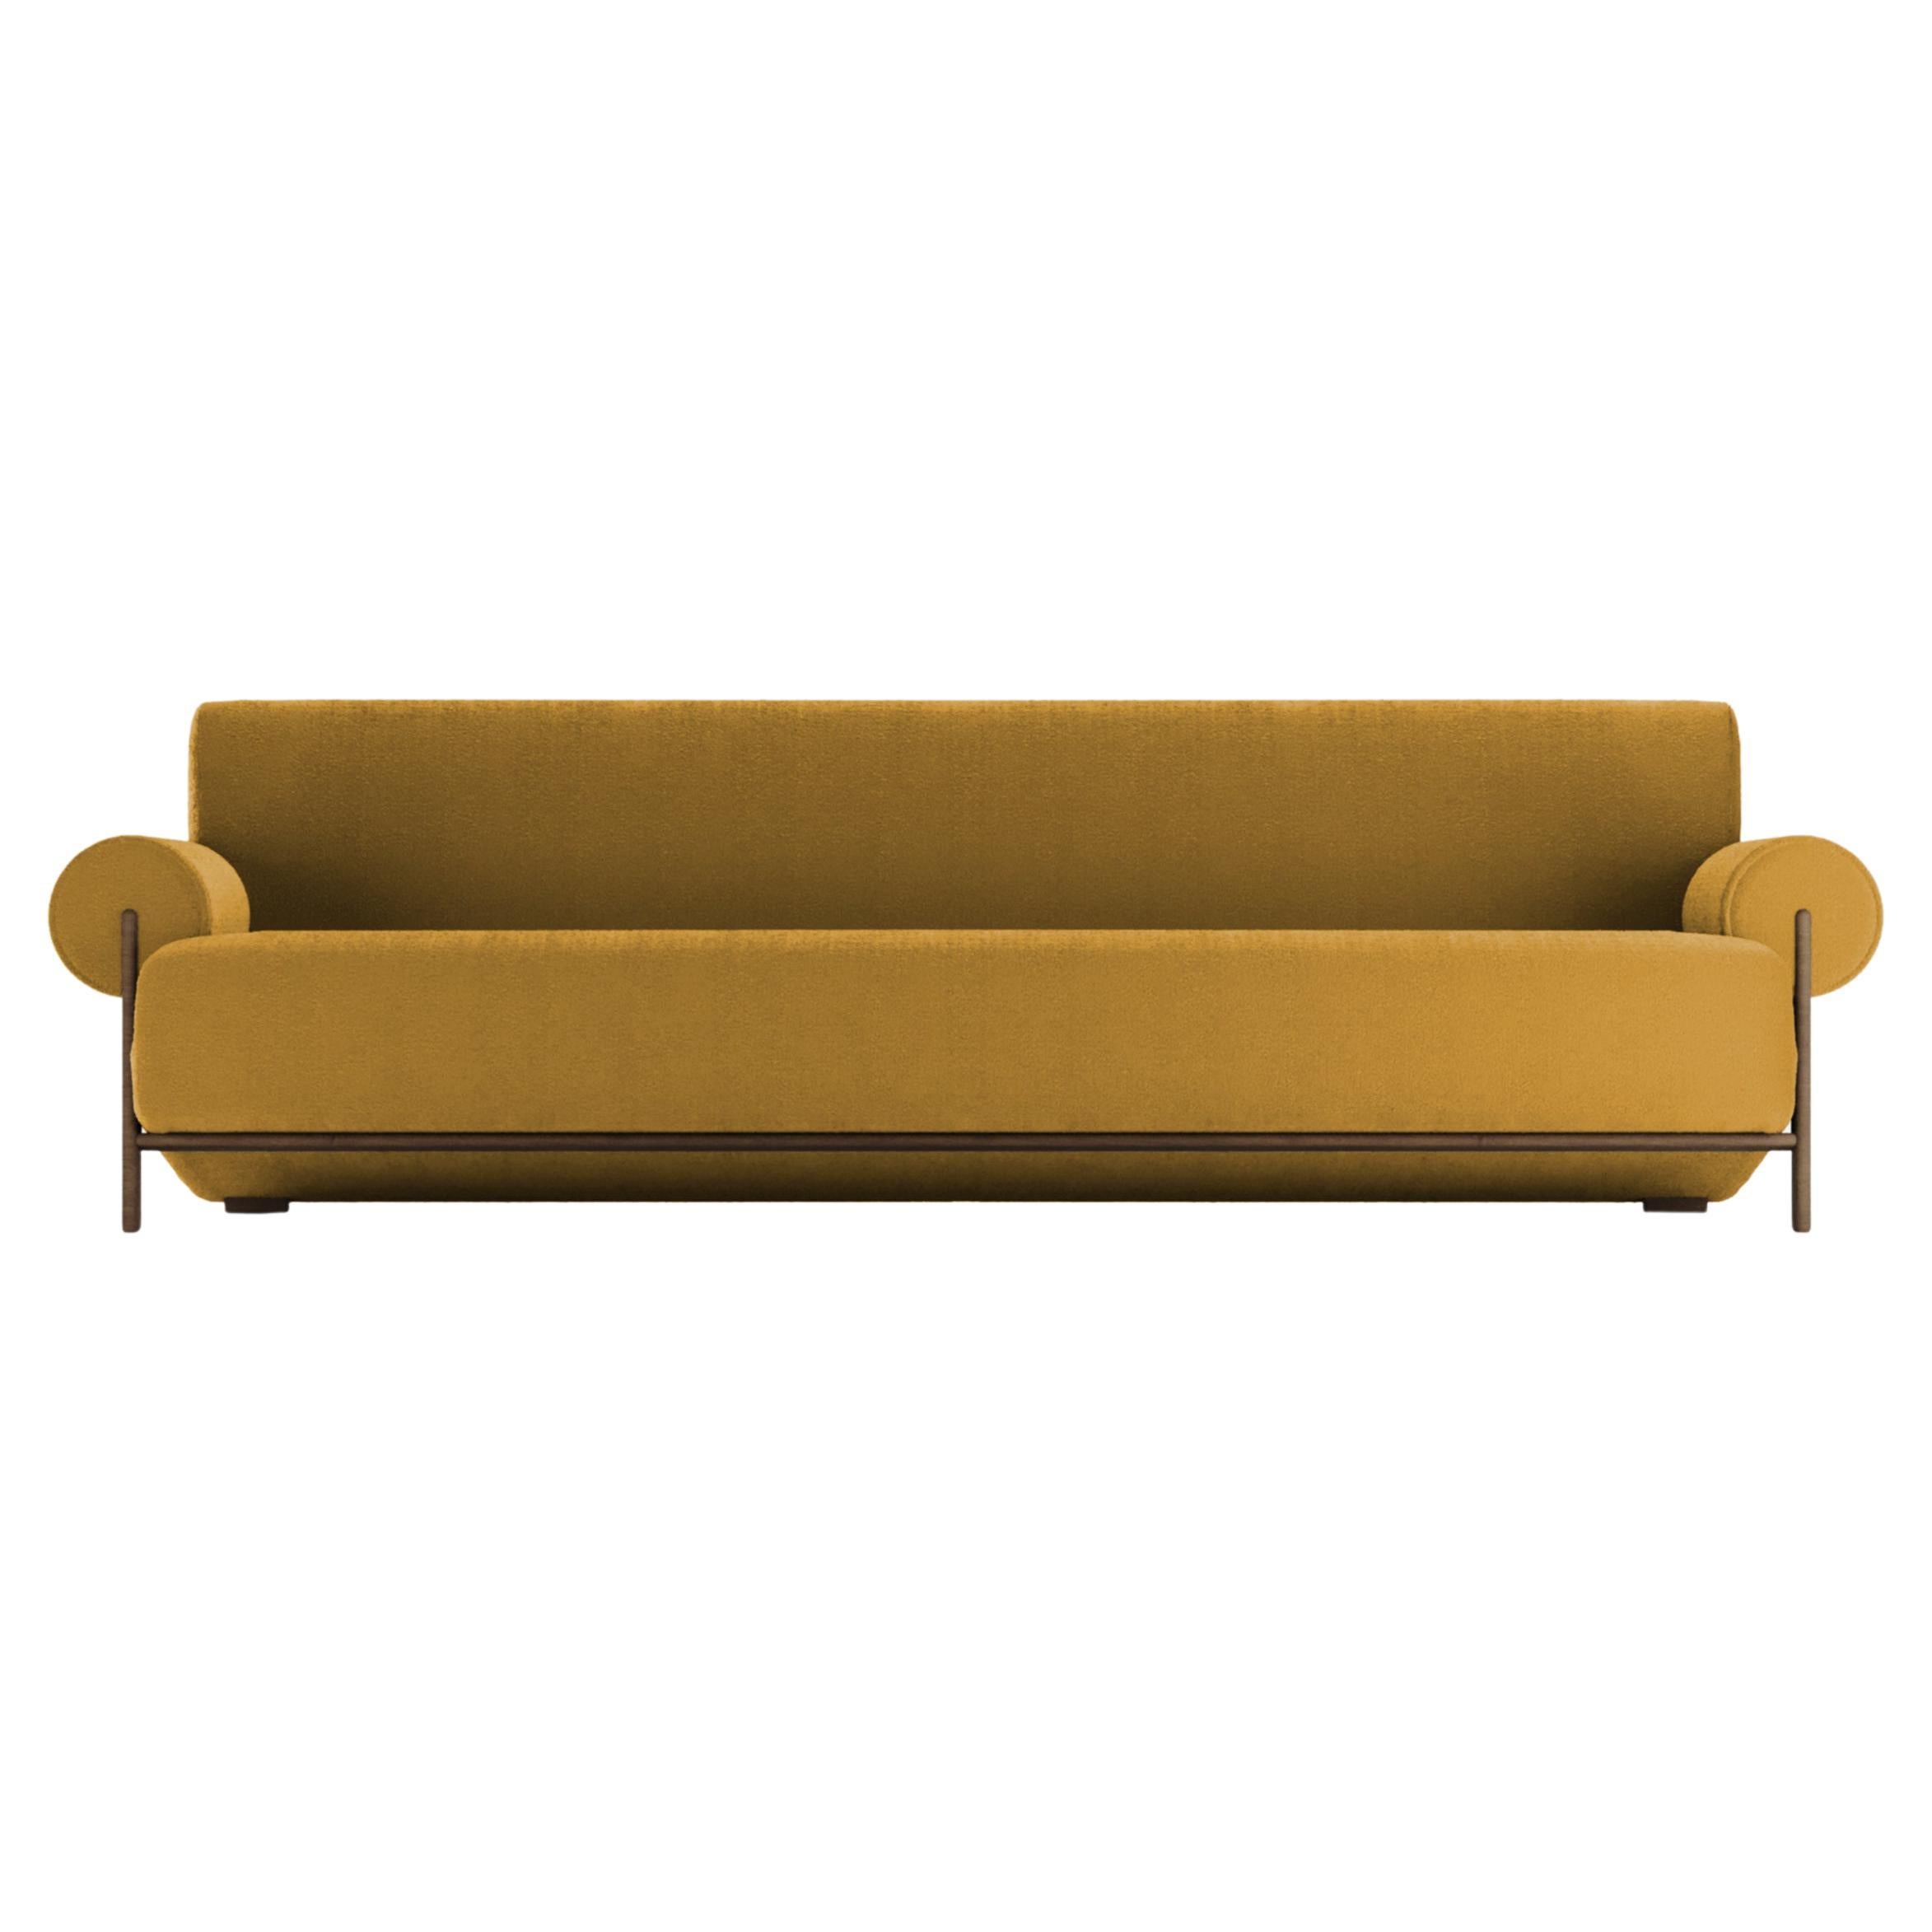 Contemporary Modern Paloma Sofa in Bouclé Mustard by Collector For Sale